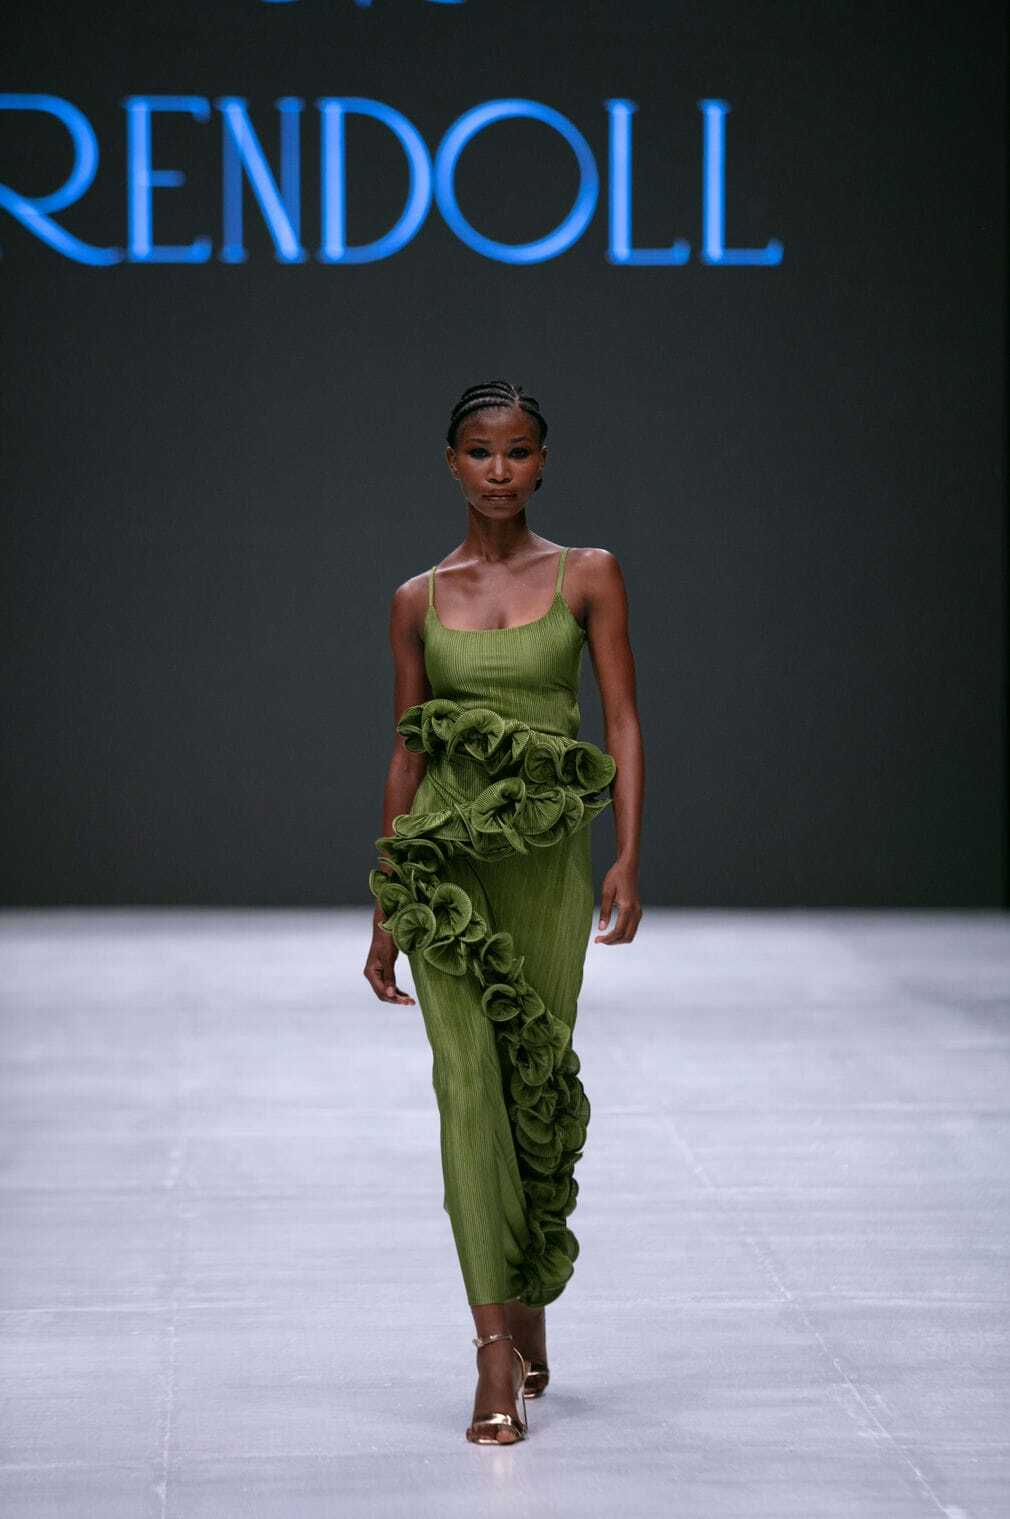 a piece from Rendoll's collection on ;Lagos Fashion Week 2023 runway show